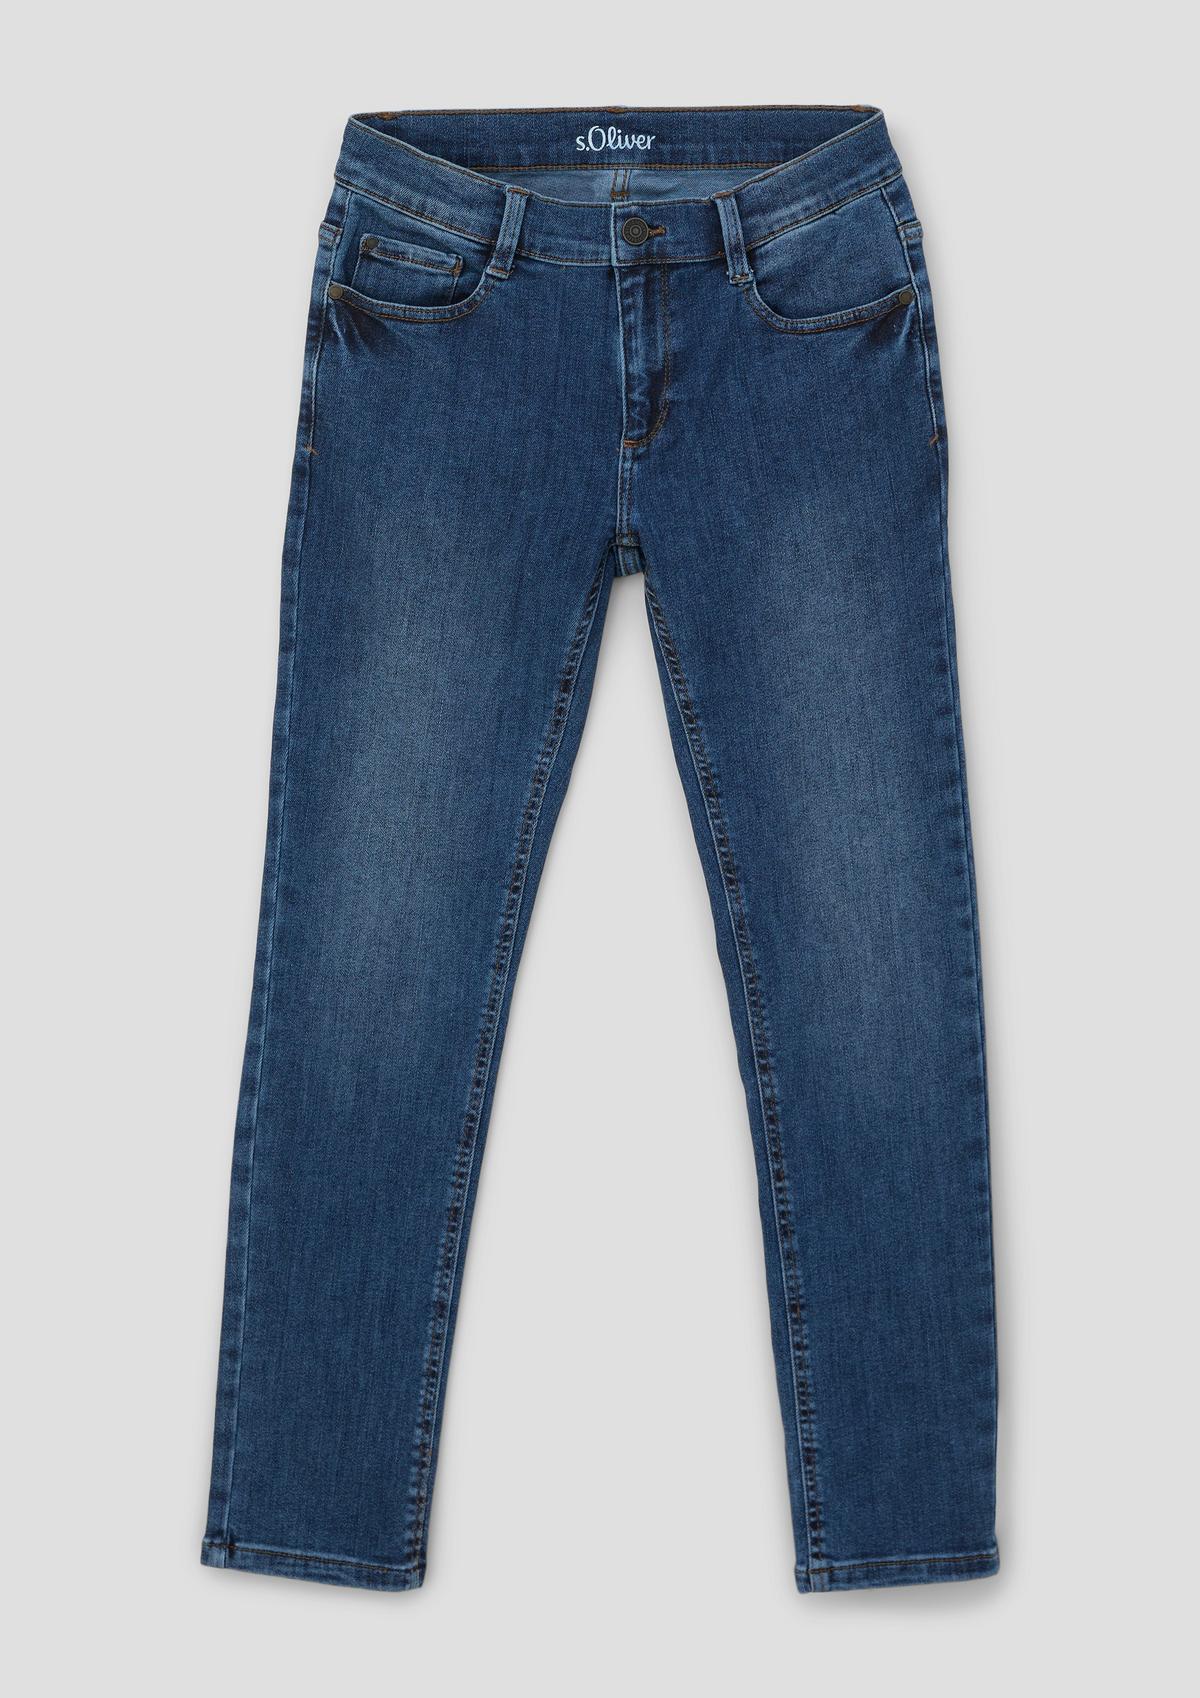 s.Oliver Seattle jeans / slim fit / mid rise / skinny leg